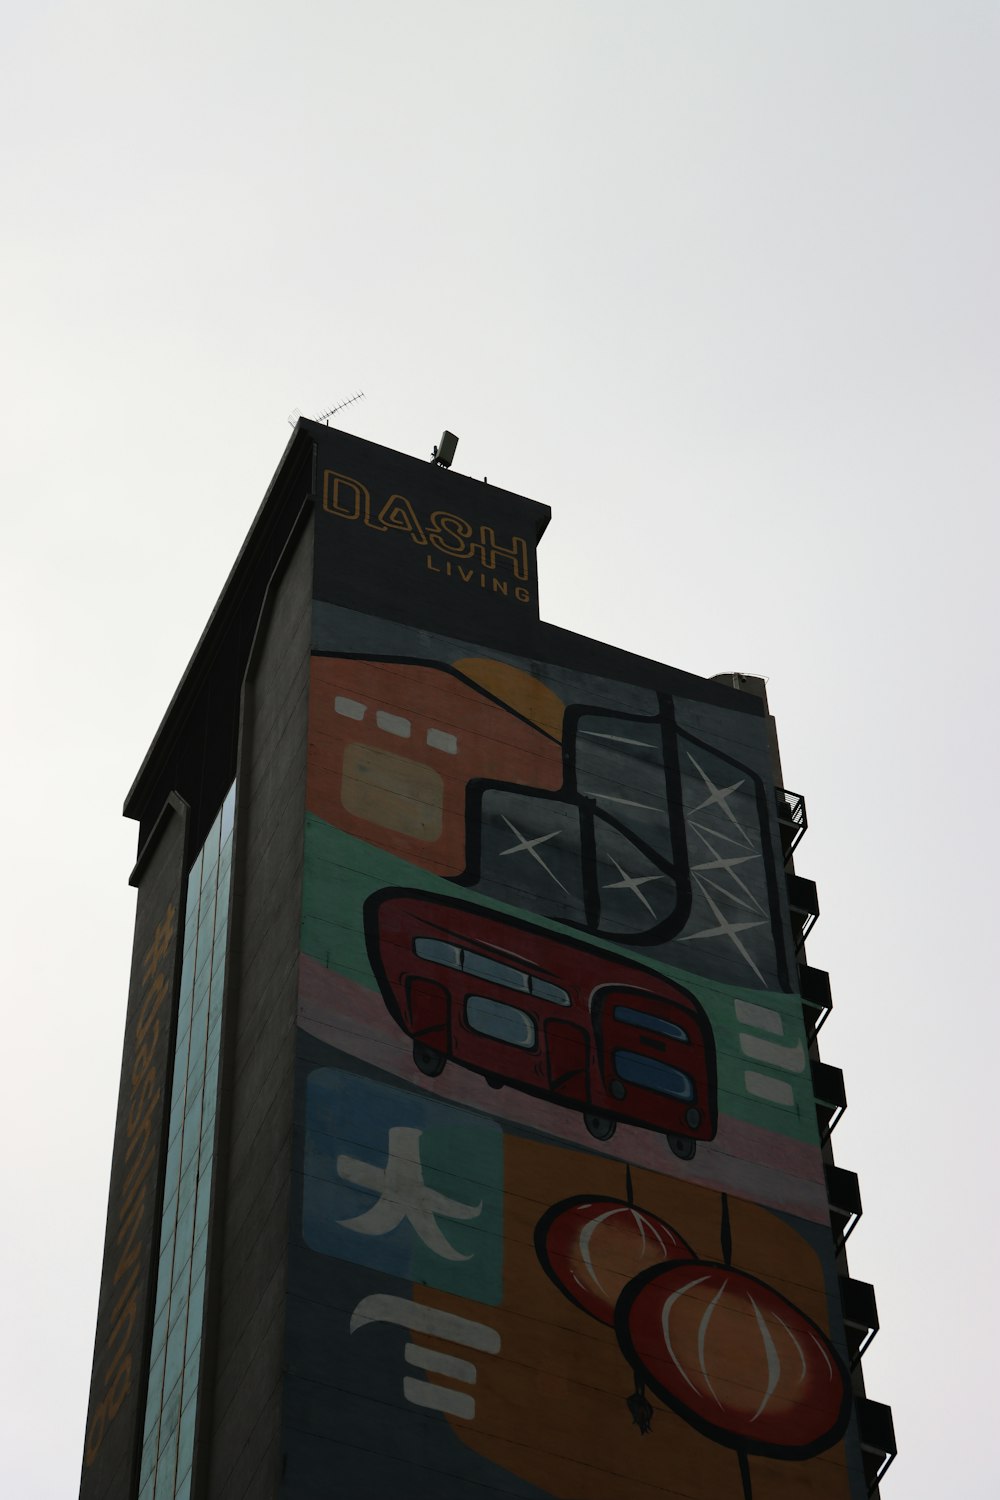 a tall building with a mural on the side of it